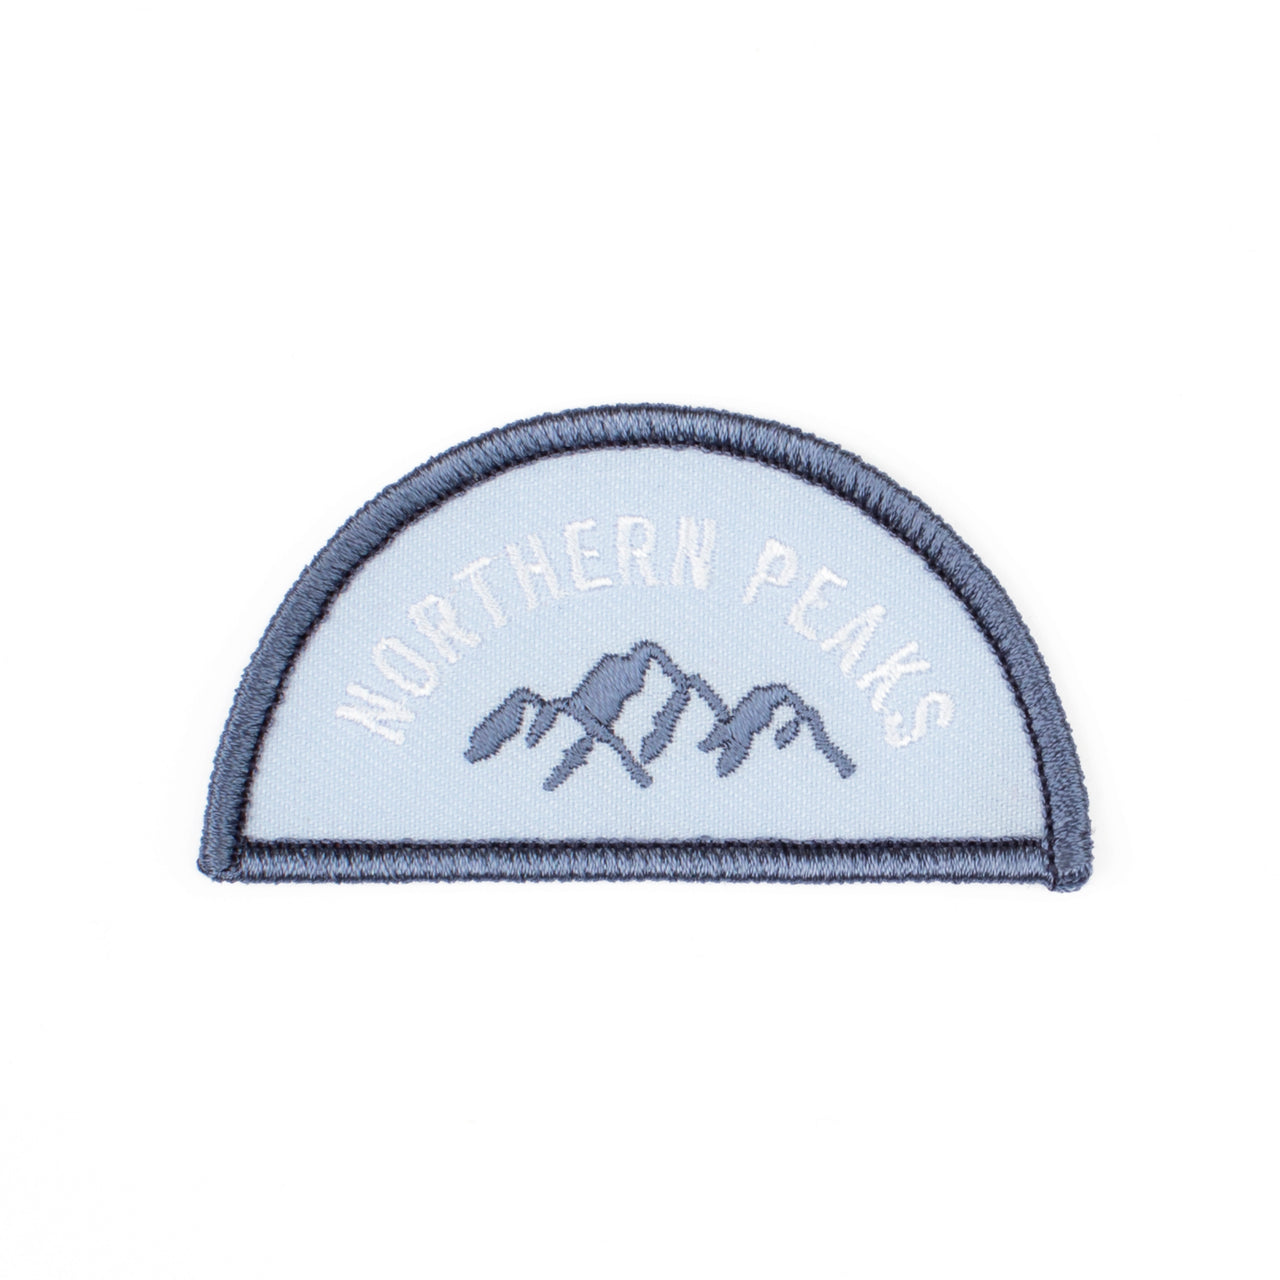 Iron on Patch - Northern Peaks